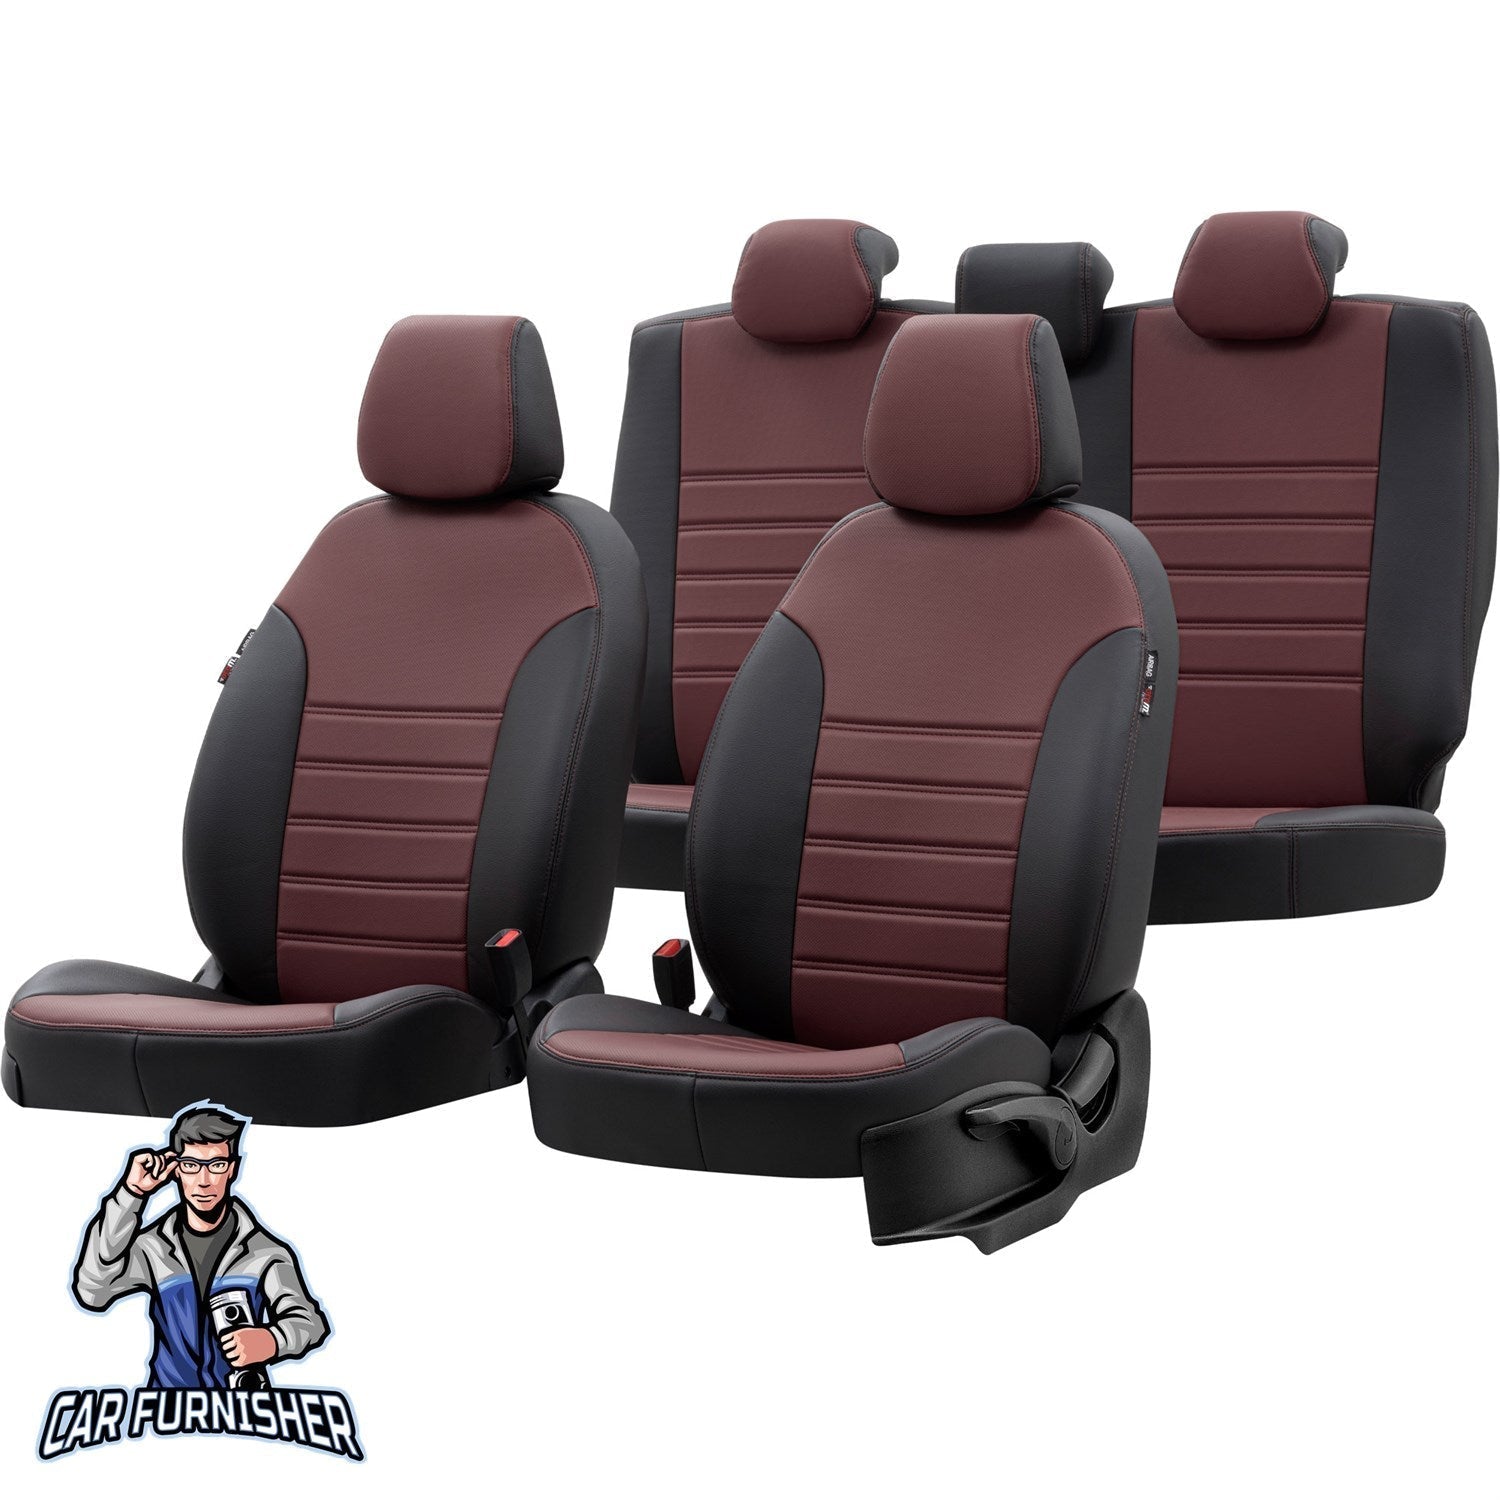 Hyundai H-200 Seat Covers Istanbul Leather Design Burgundy Leather